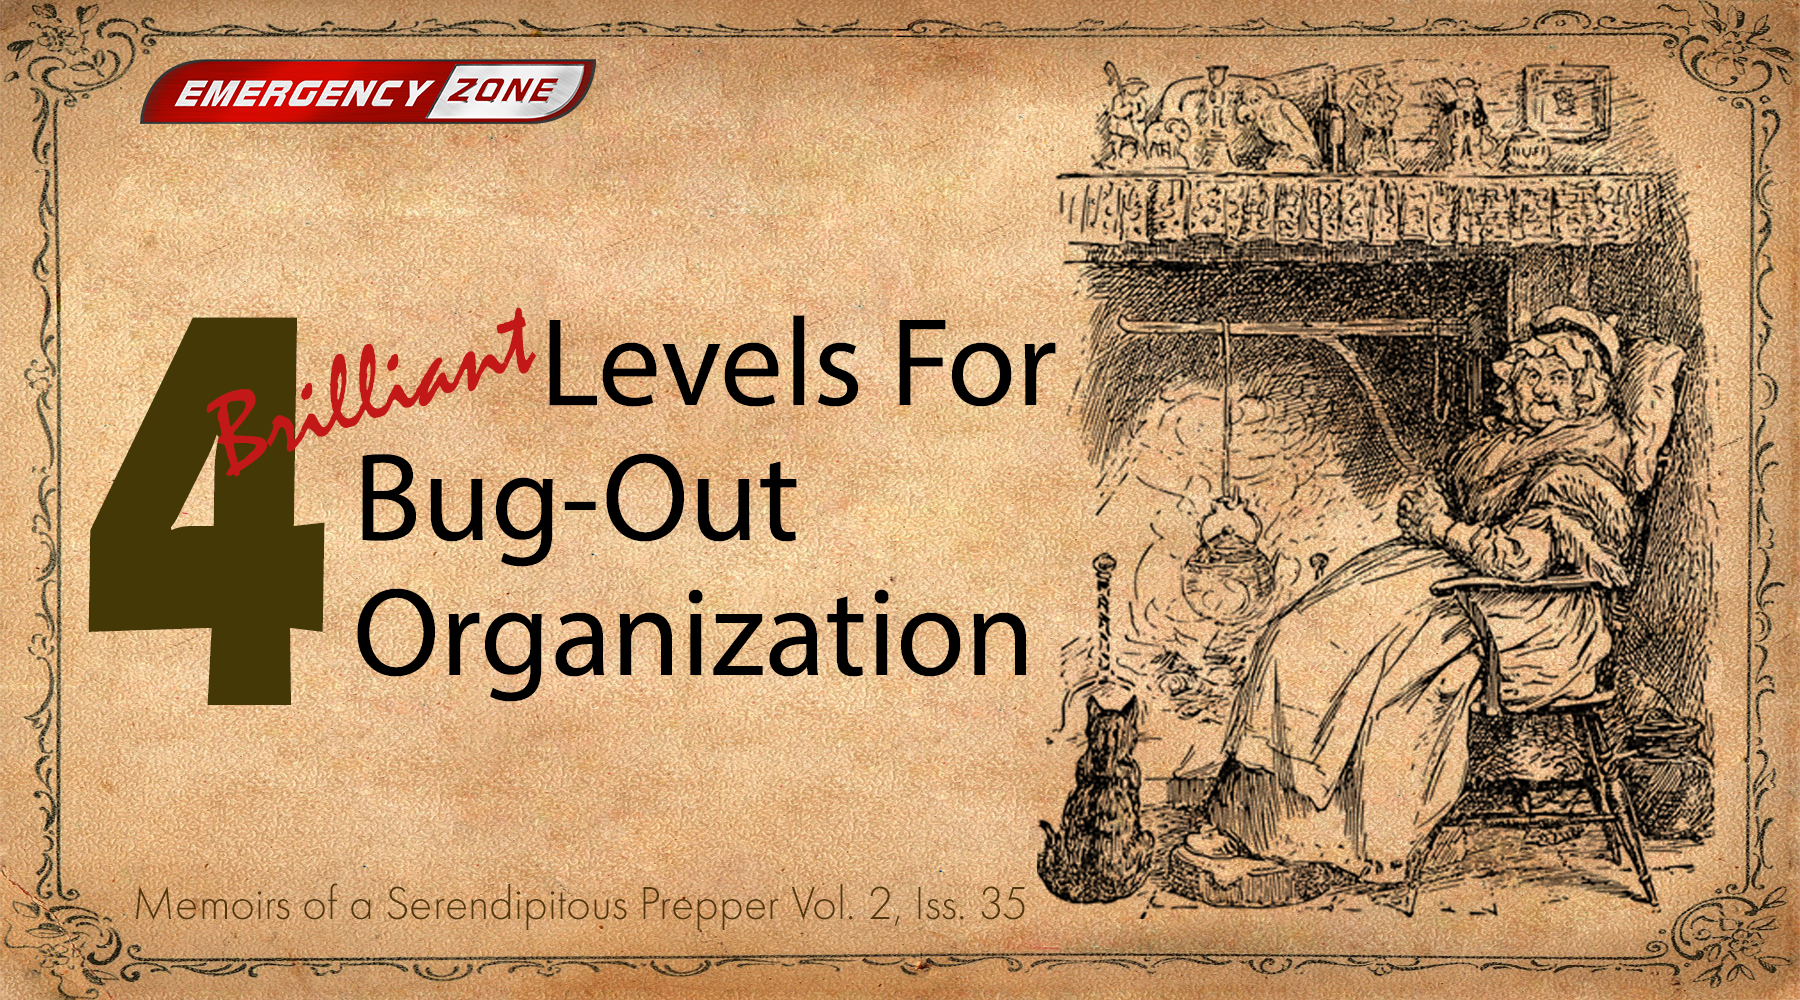 4 Brilliant Levels For But-Out Organization